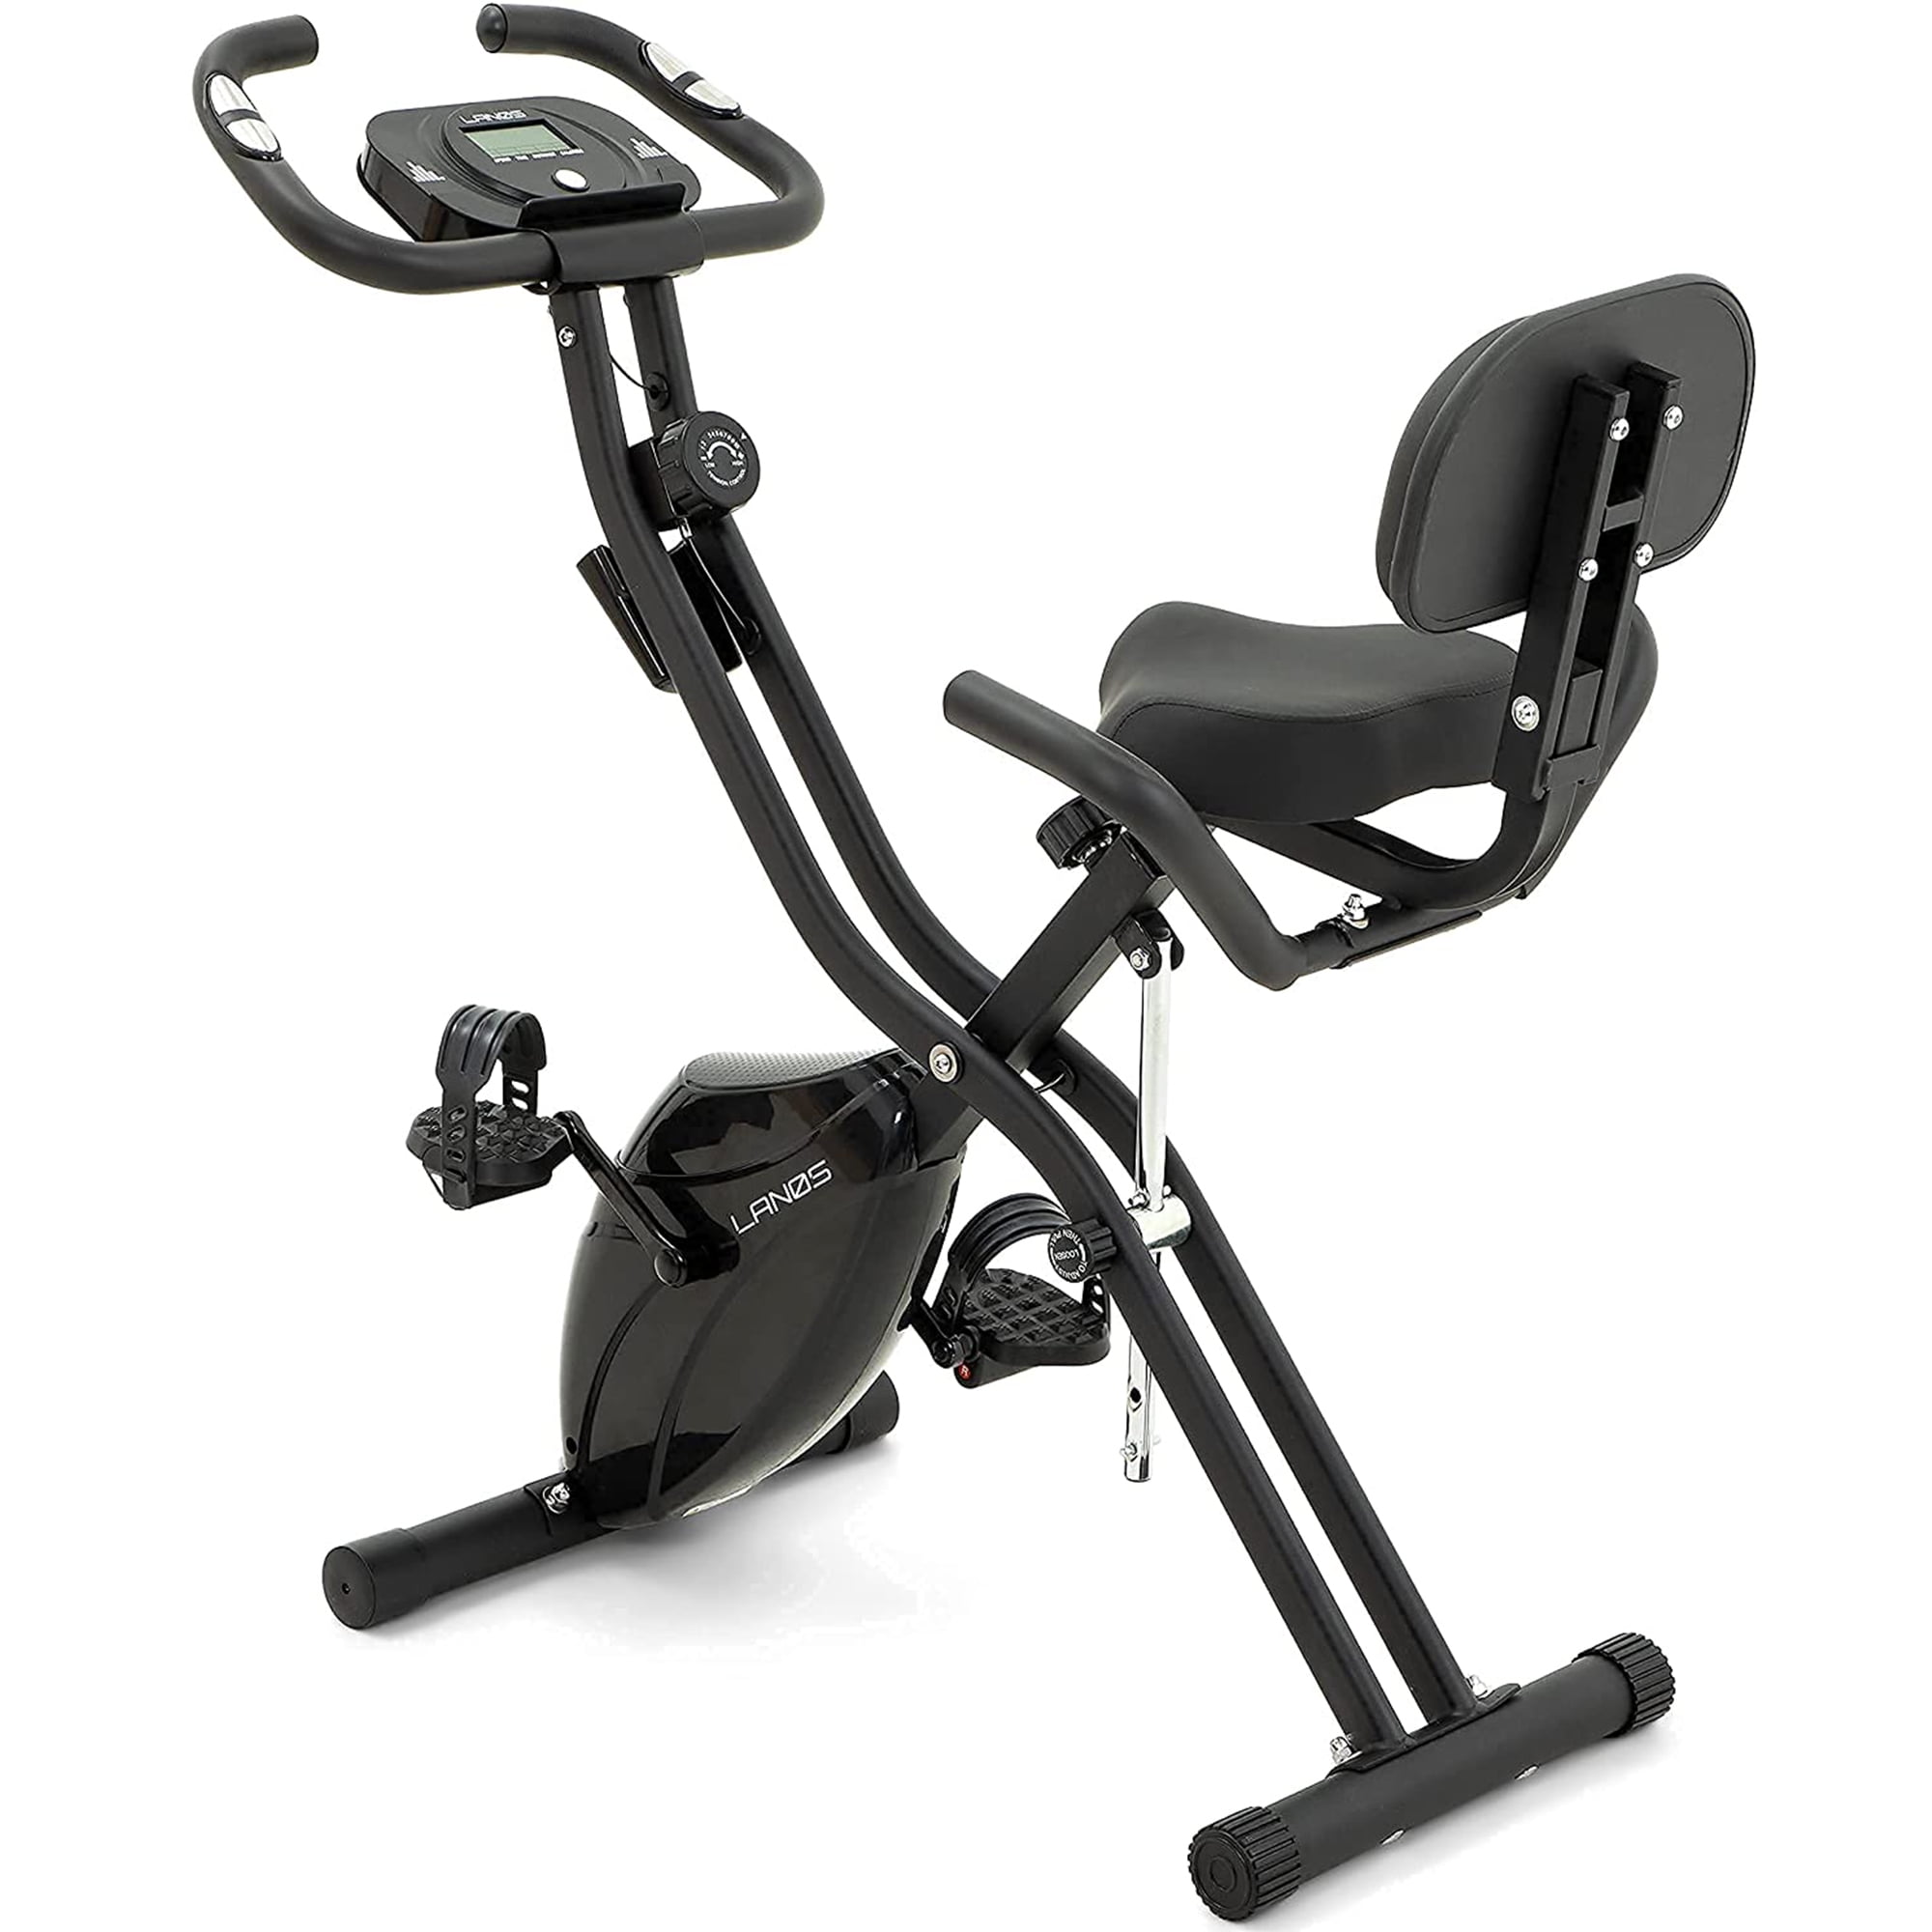 Details about   Magenetic Exercise Bike w/Multi Level Control Adjustable LCD Machine Green HOT 